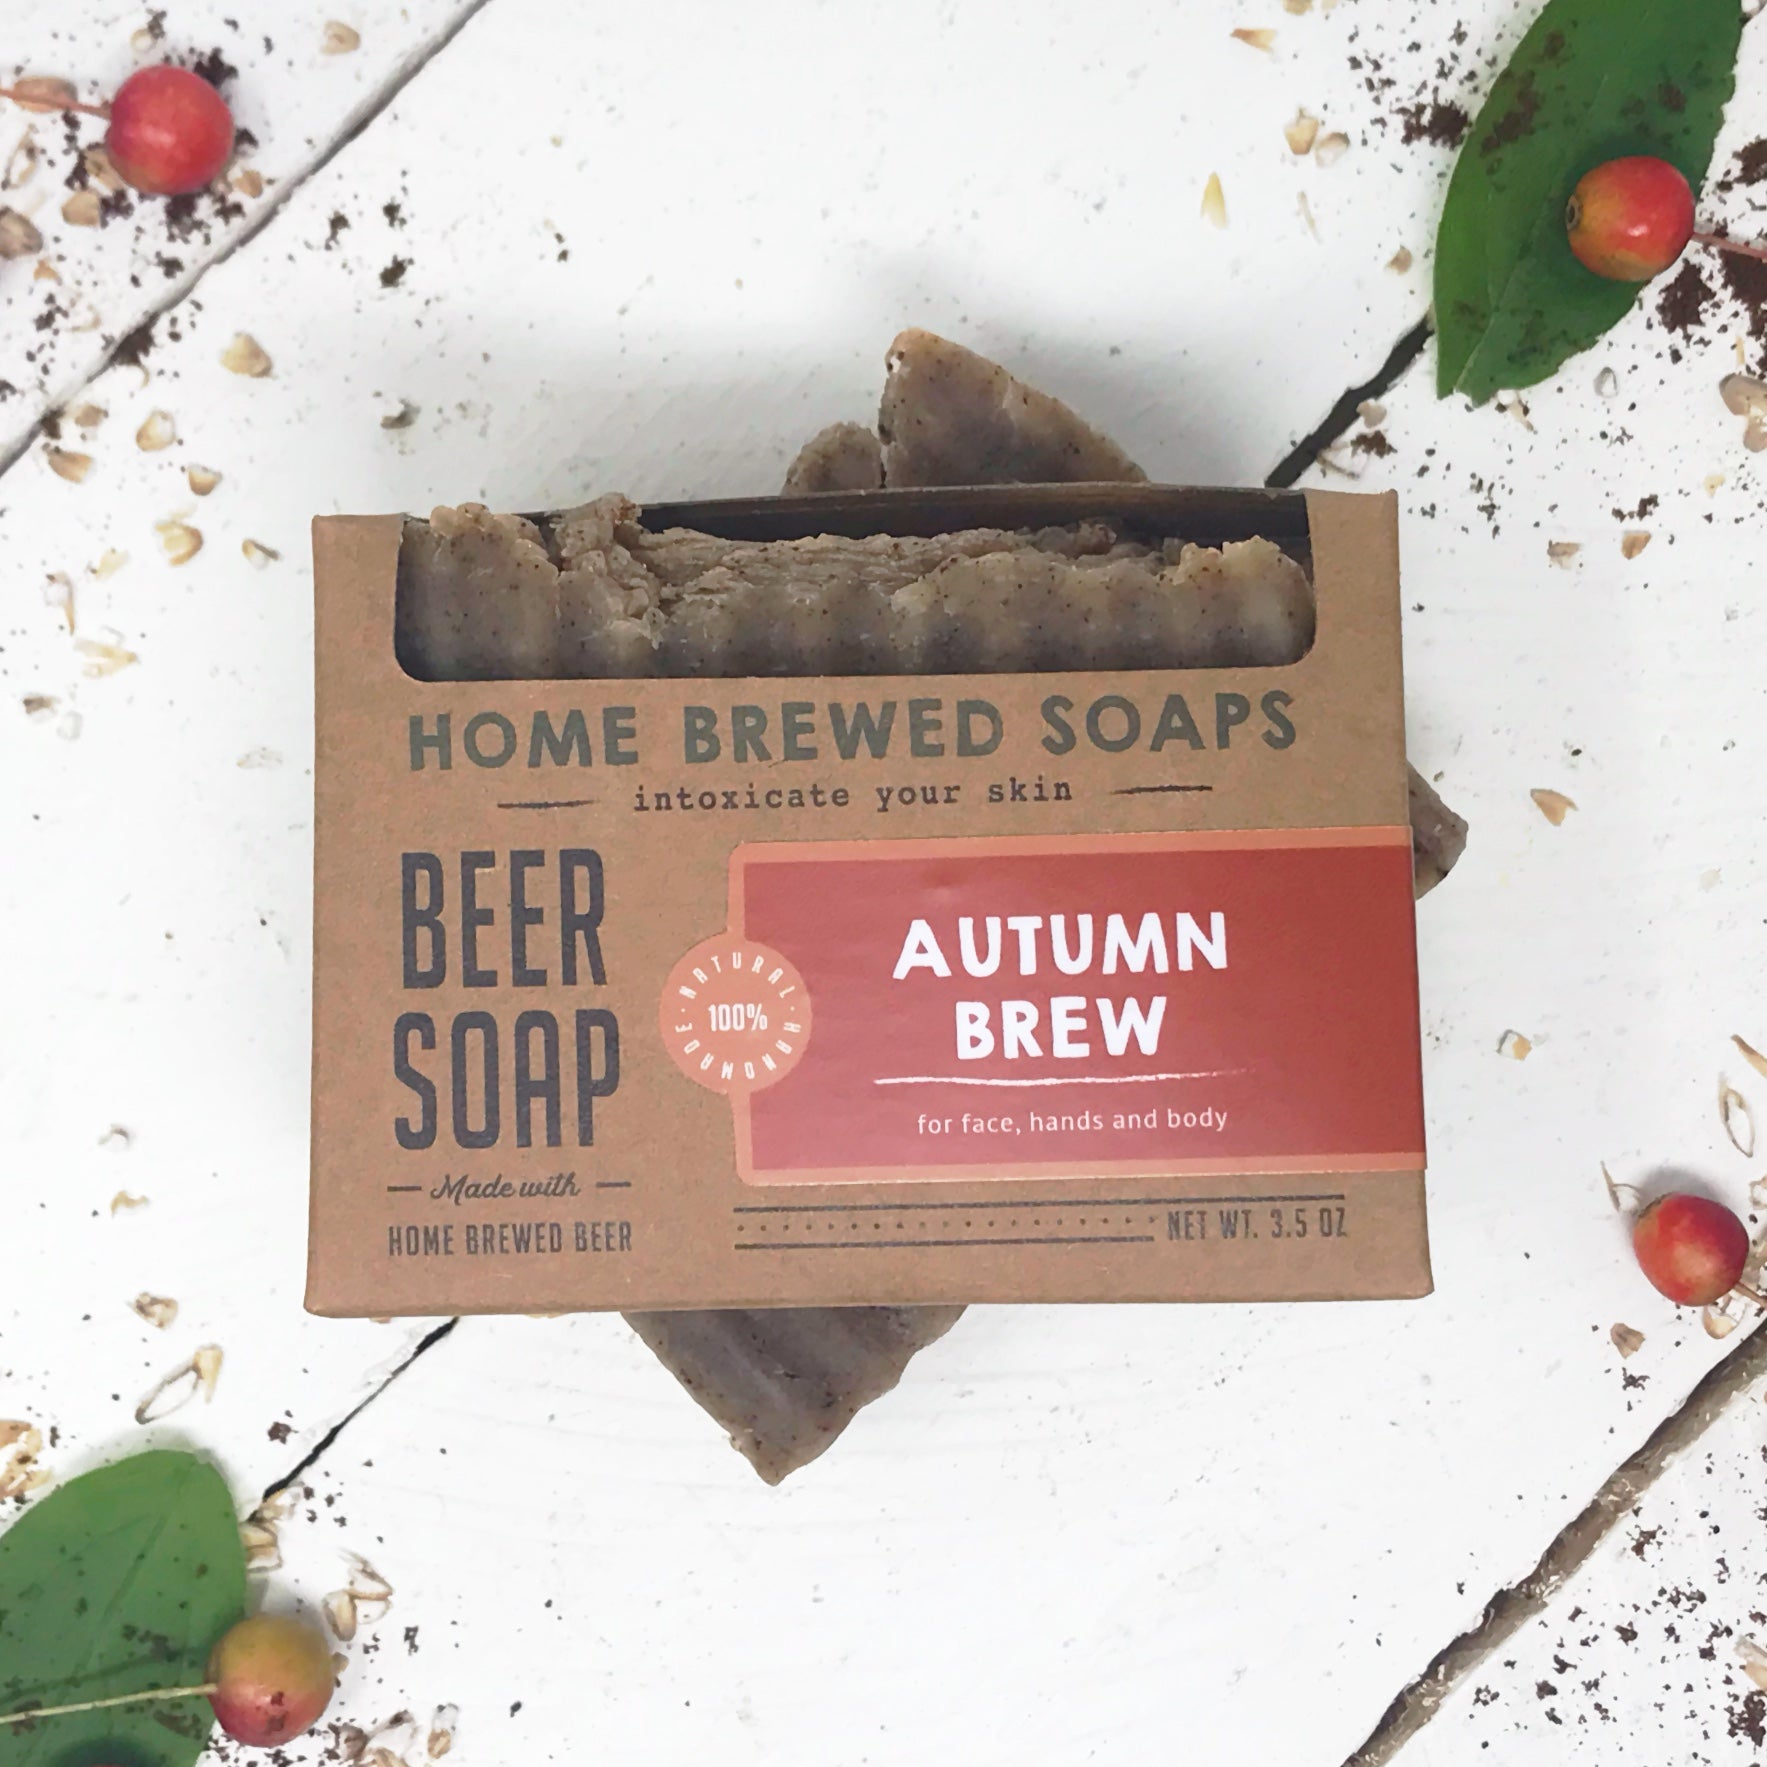 Autumn Brew - Natural Soap for Beer Lovers by Home Brewed Soaps